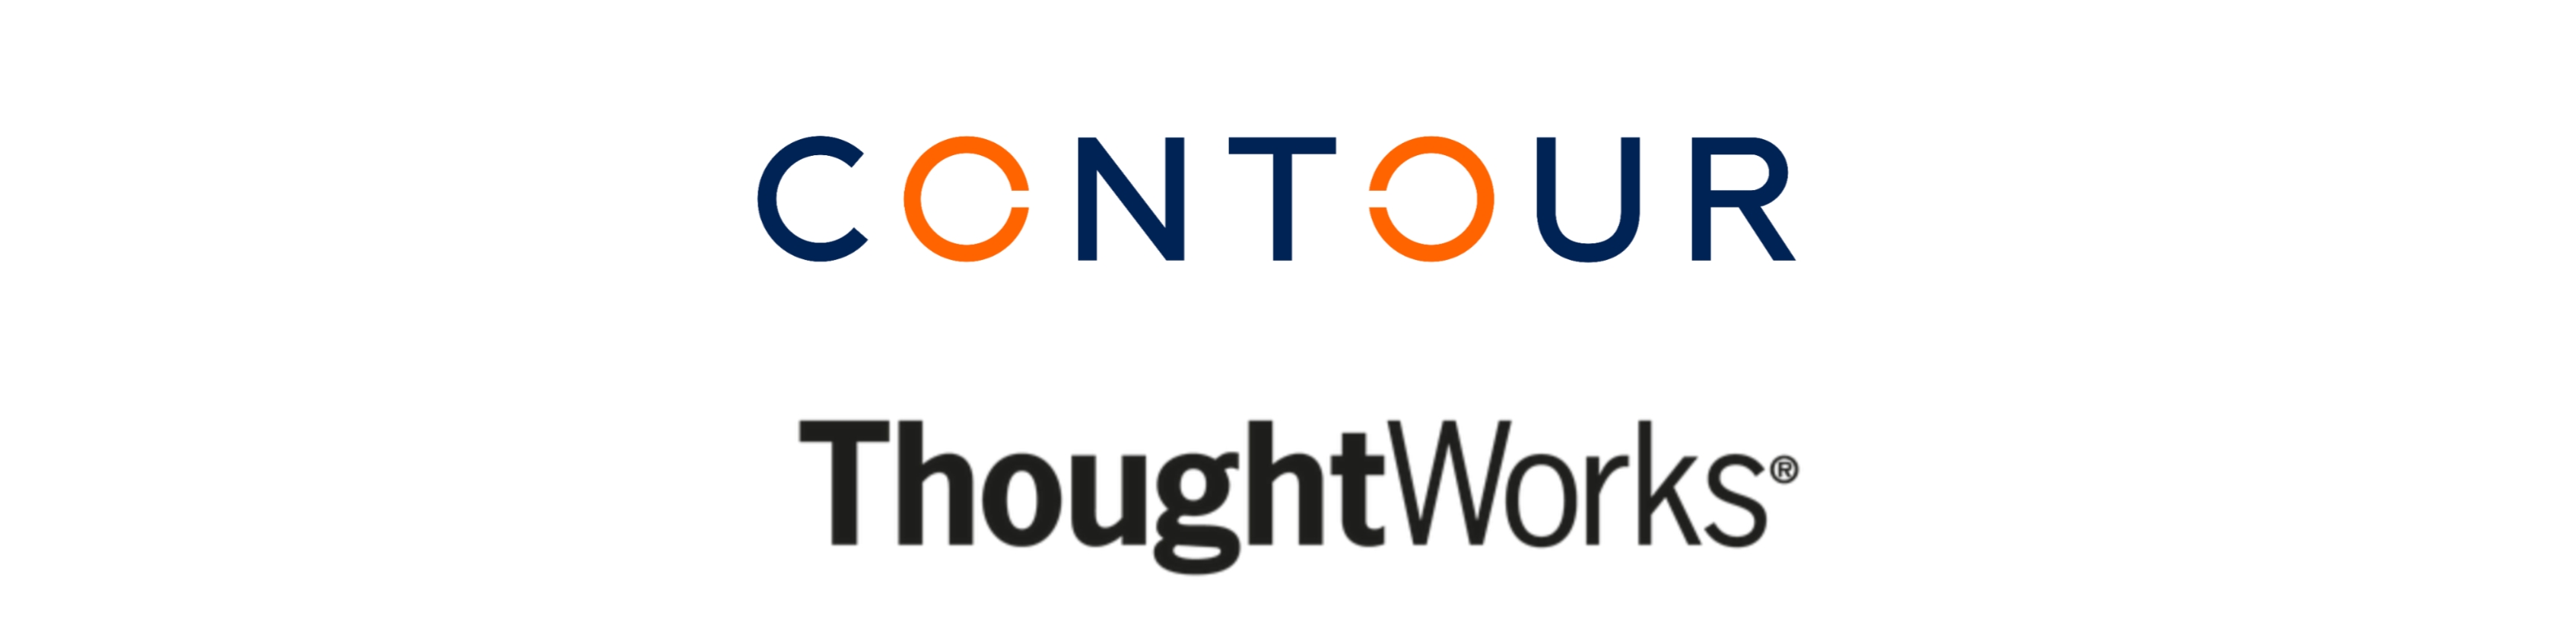 Contour Partners with Thoughtworks to Ramp Up Digital Trade Finance in China 